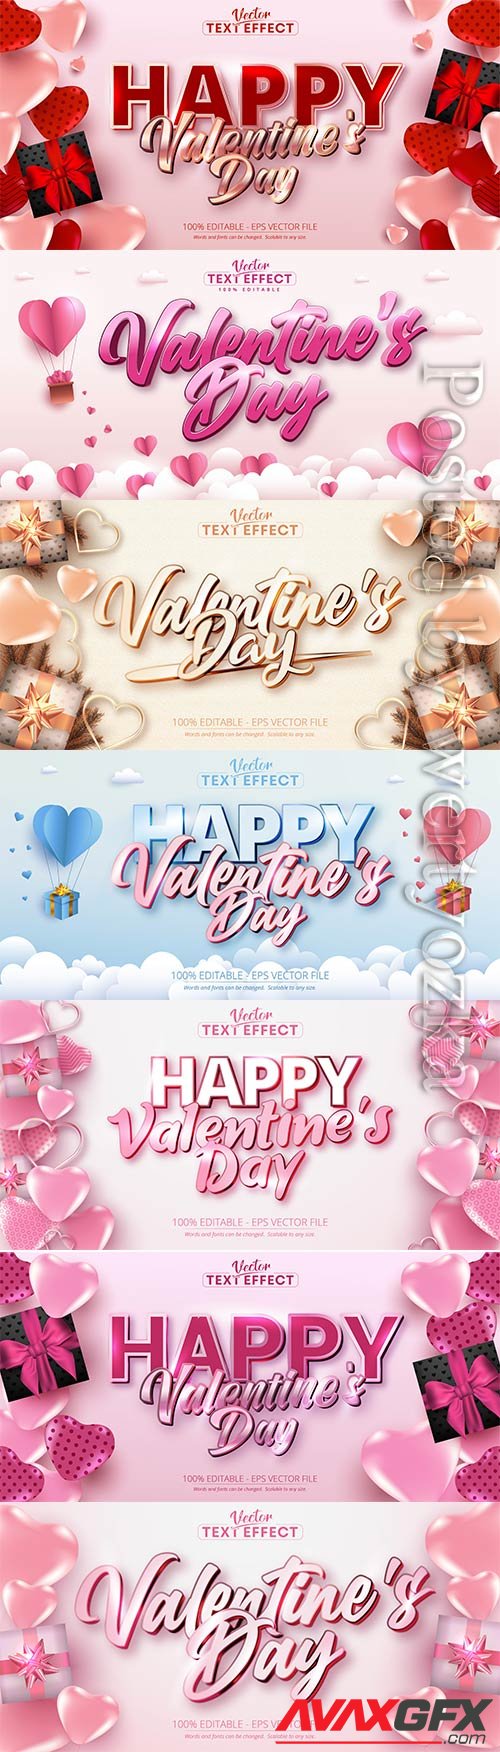 Valentine text effects style with hearts in vector